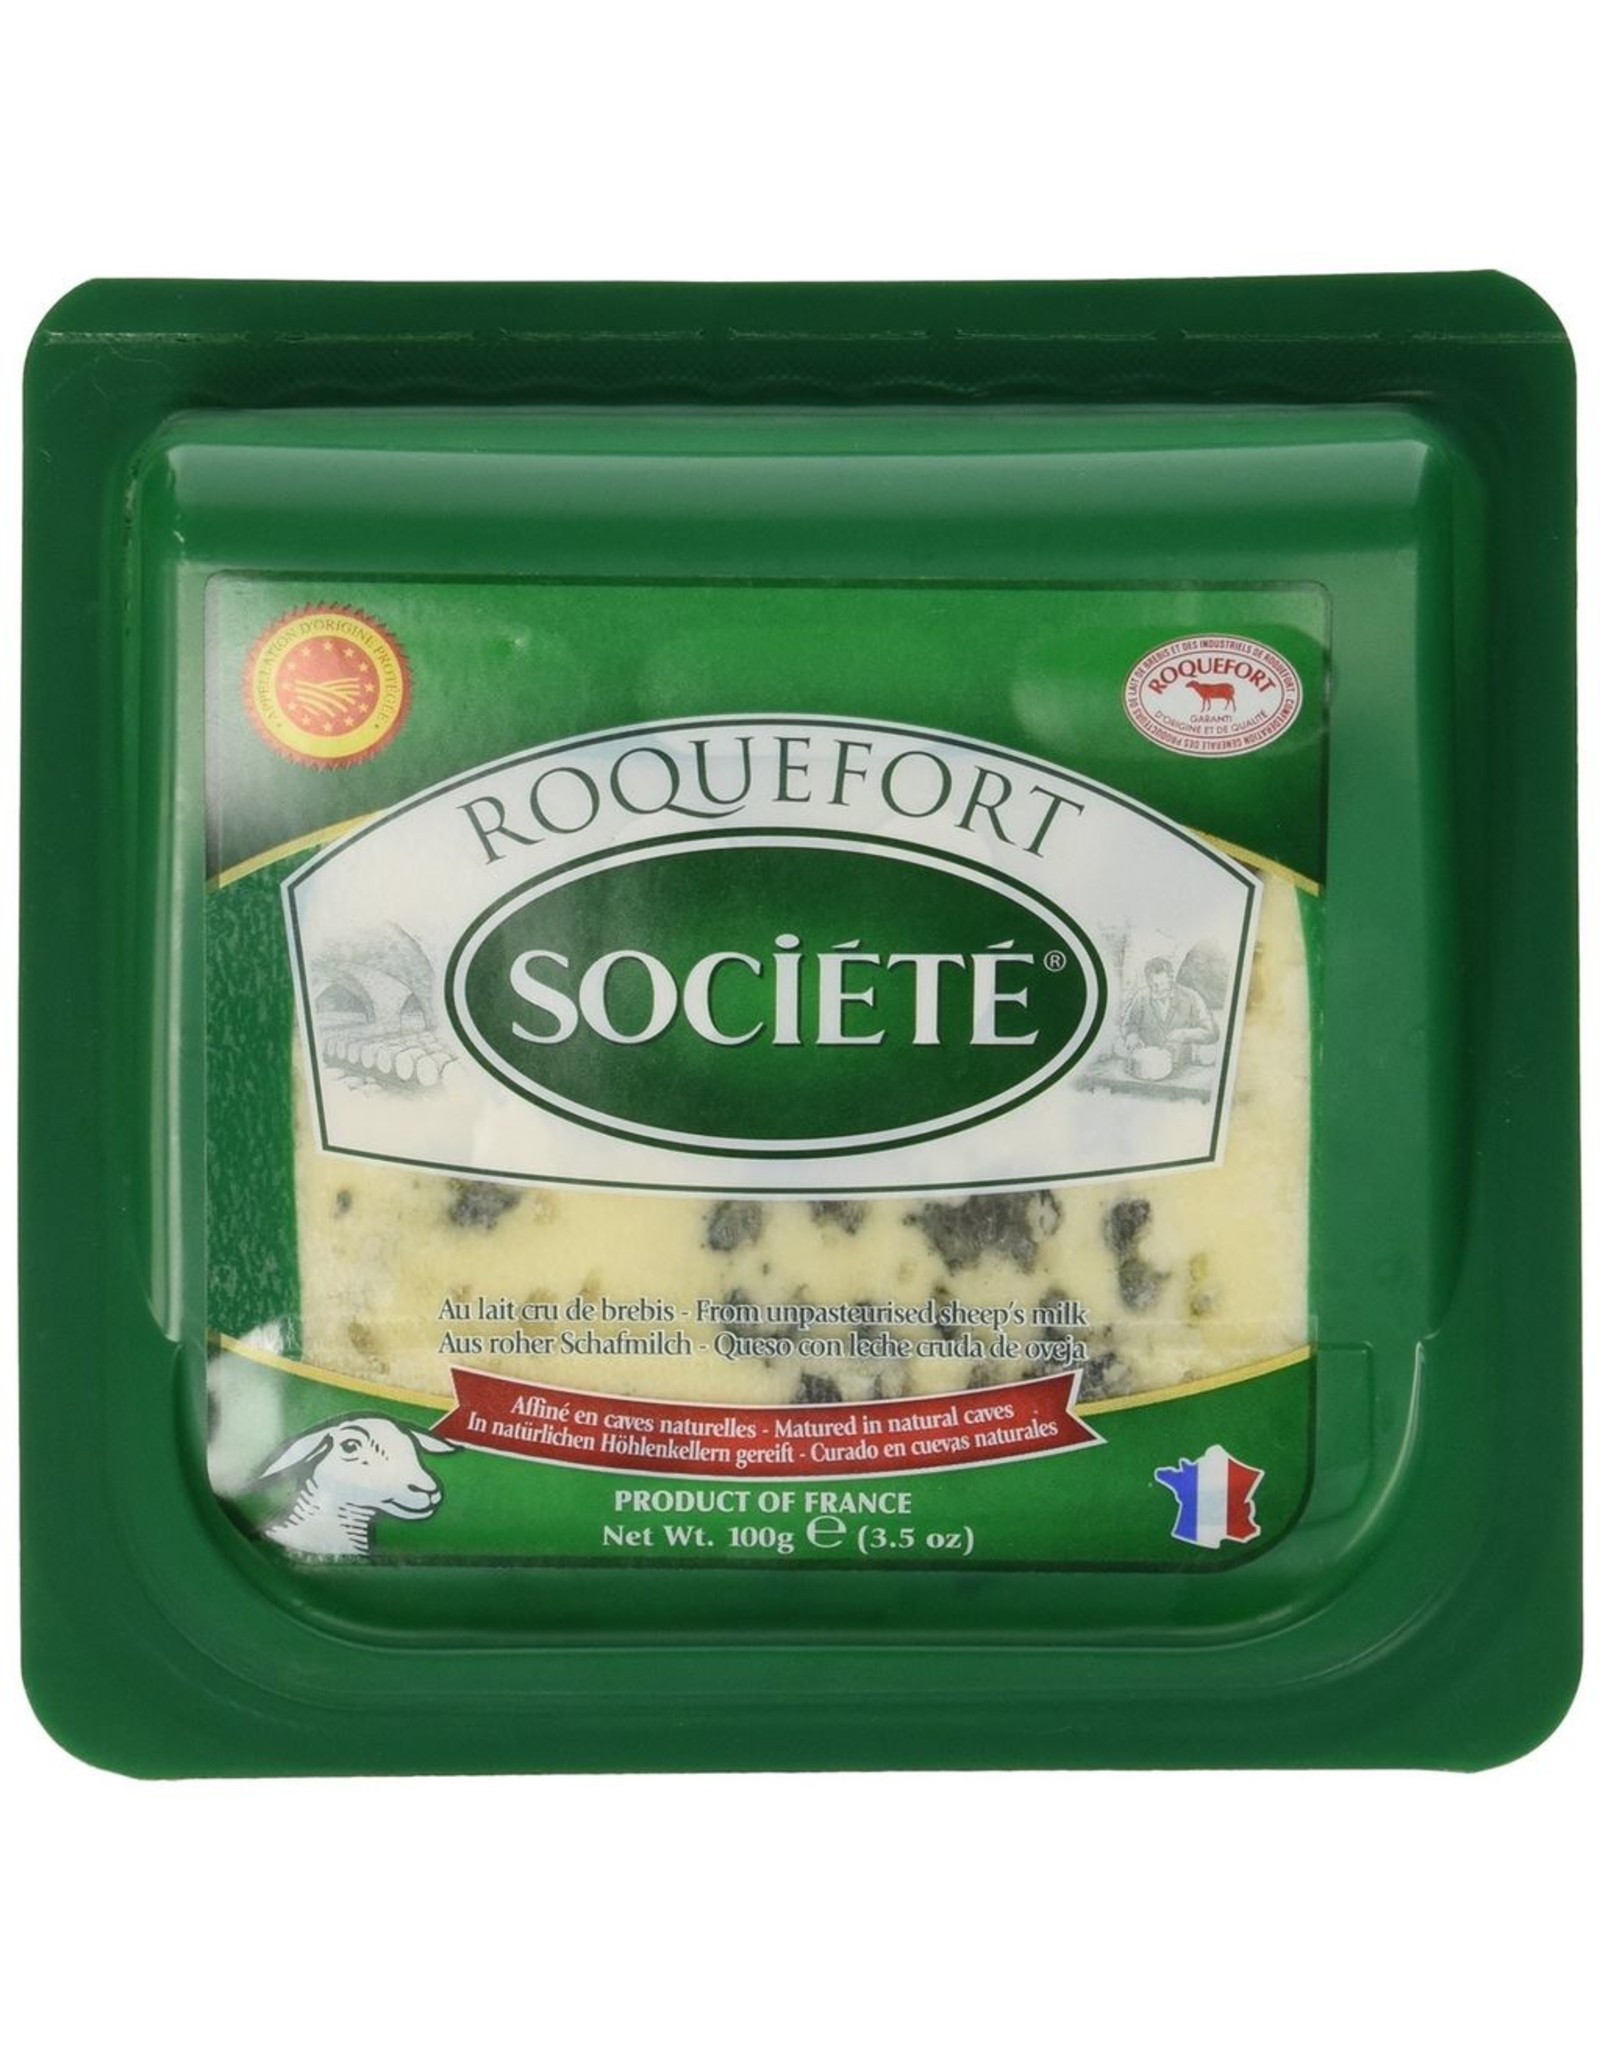 Specialty Cheese Societe, Roquefort, Sheep’s milk cheese, France, 3.5oz